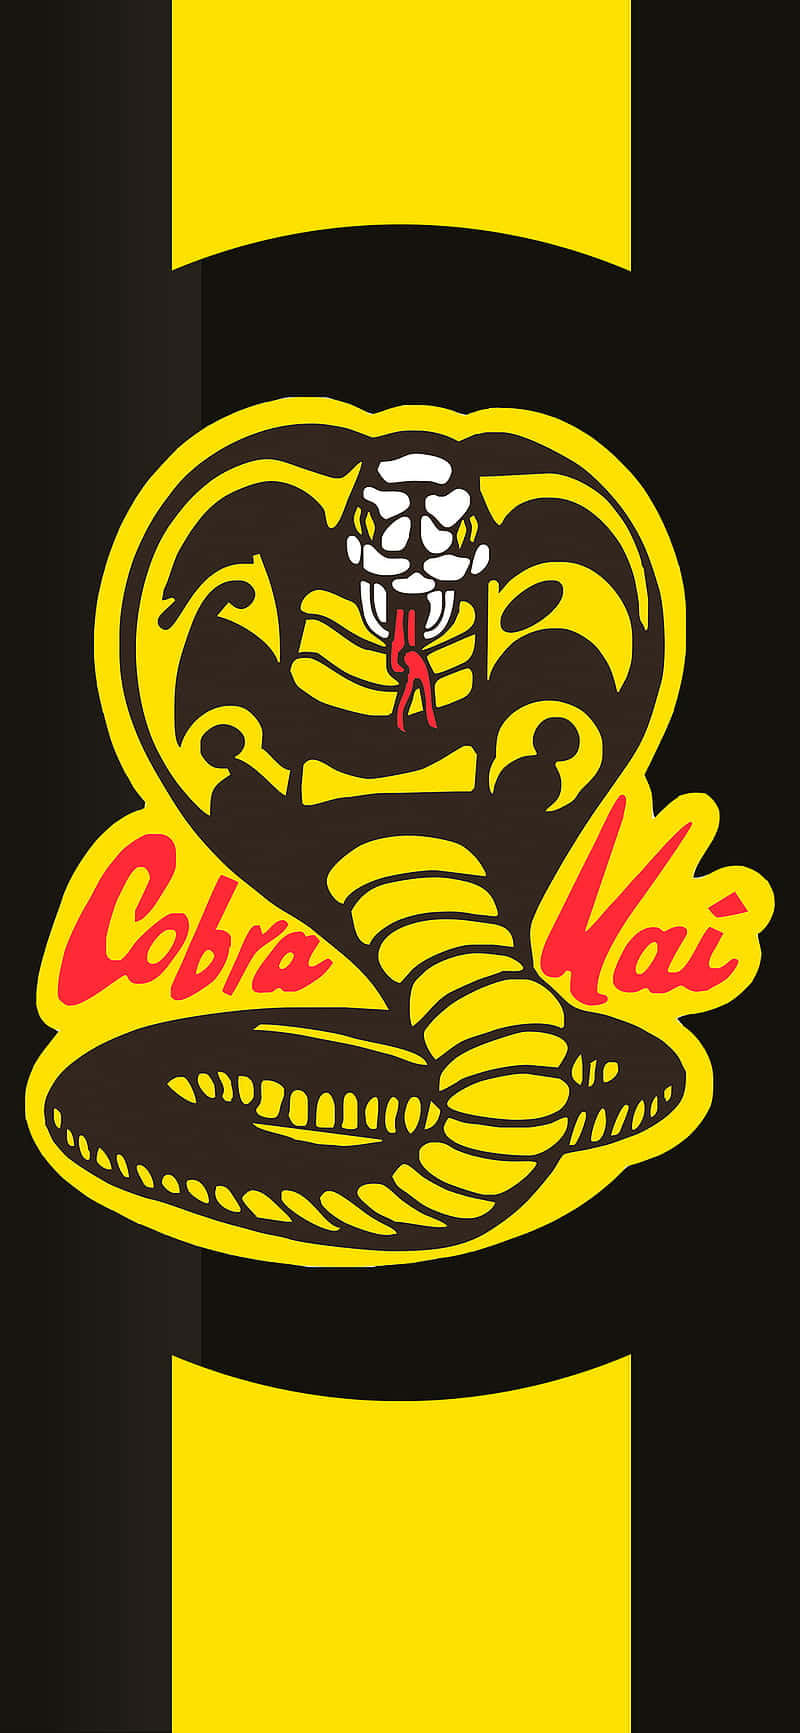 Get into the Fight with the Cobra Kai iPhone Xr